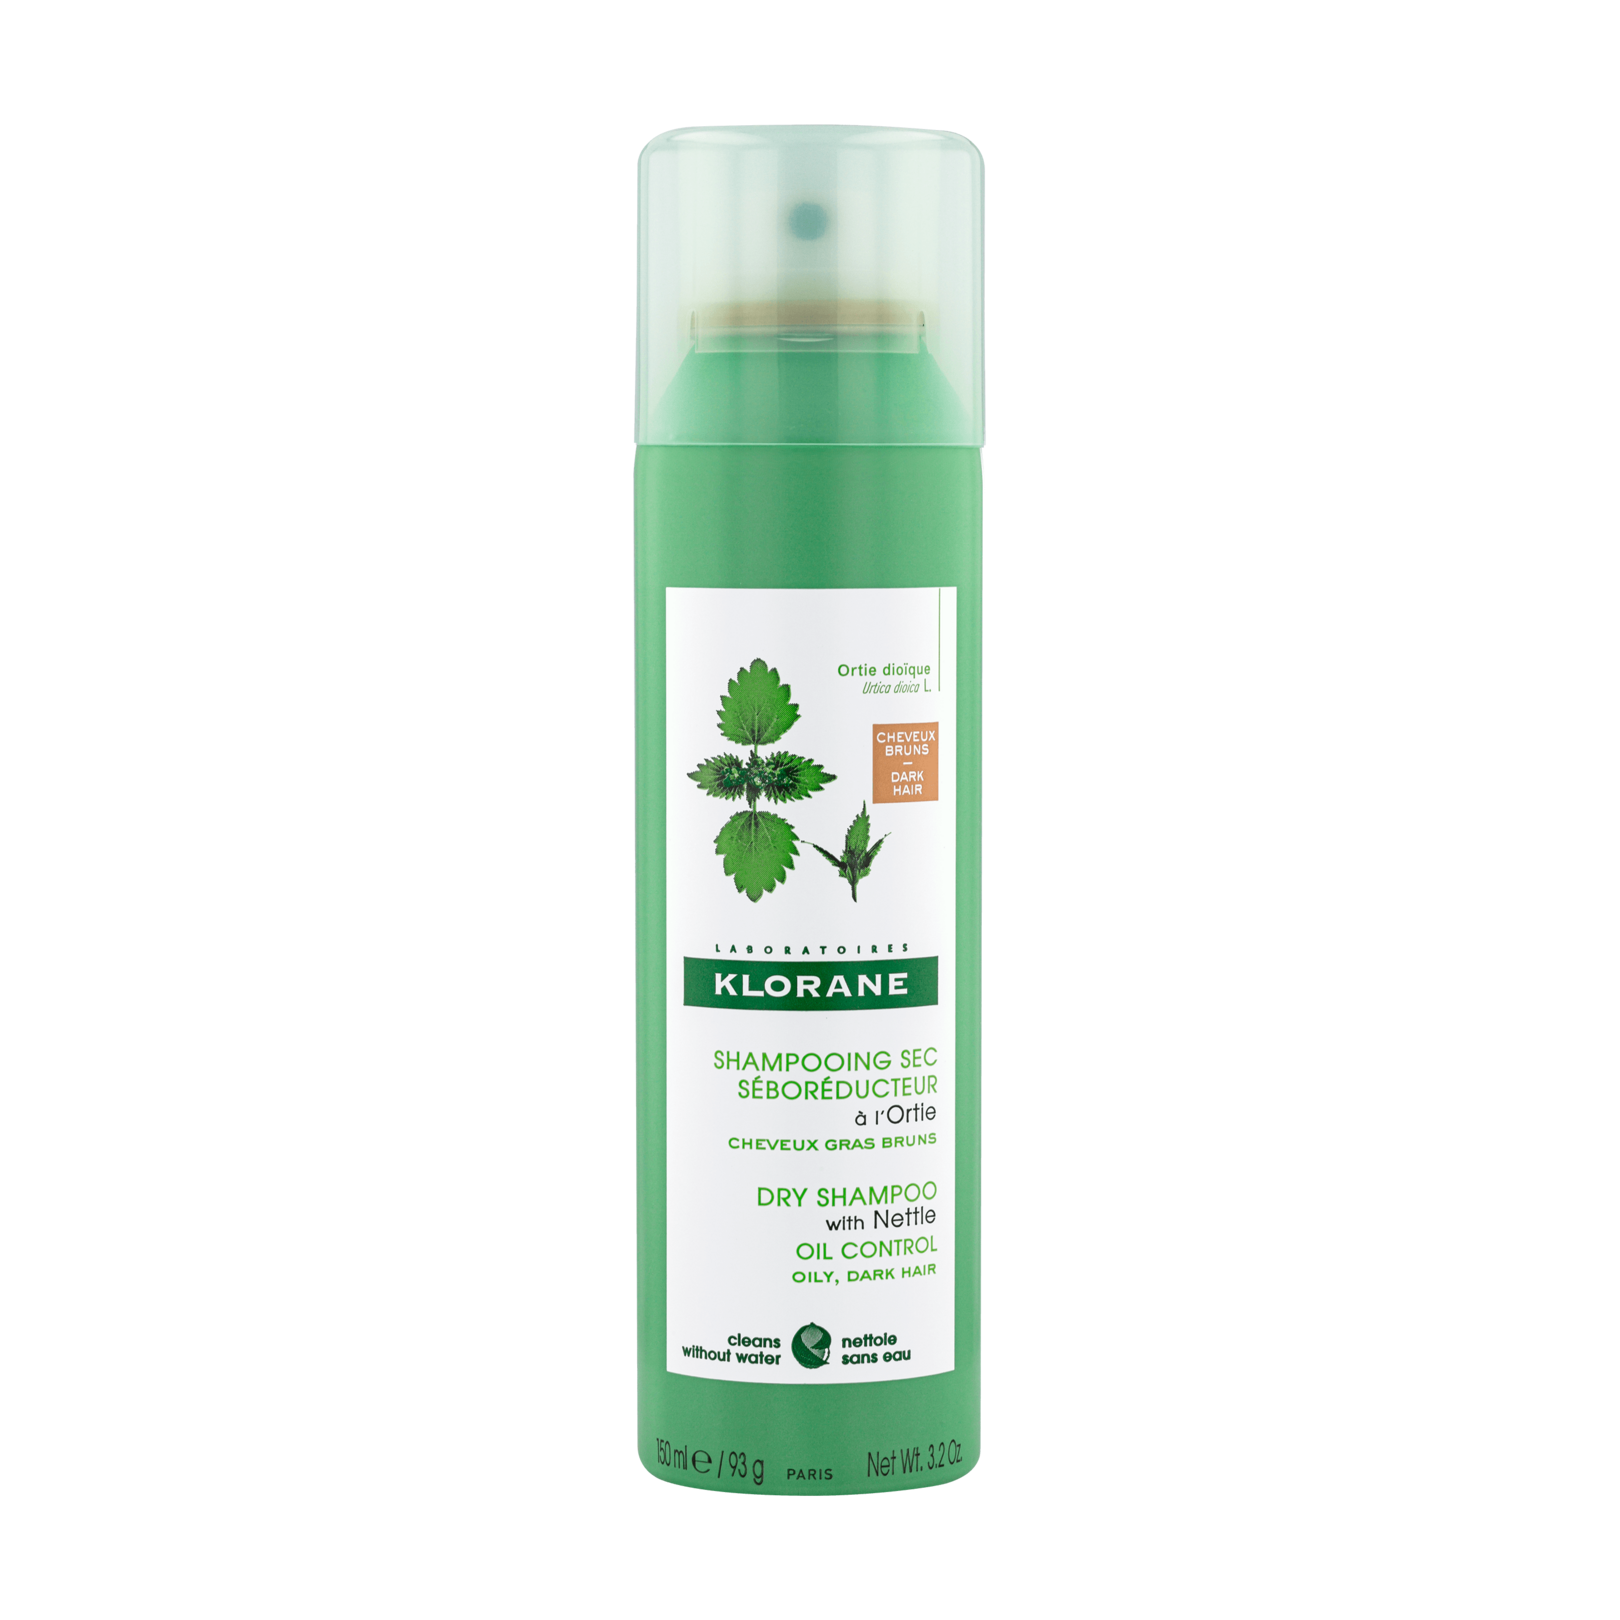 Oil control Dry Shampoo with Nettle Tinted - Oily hair